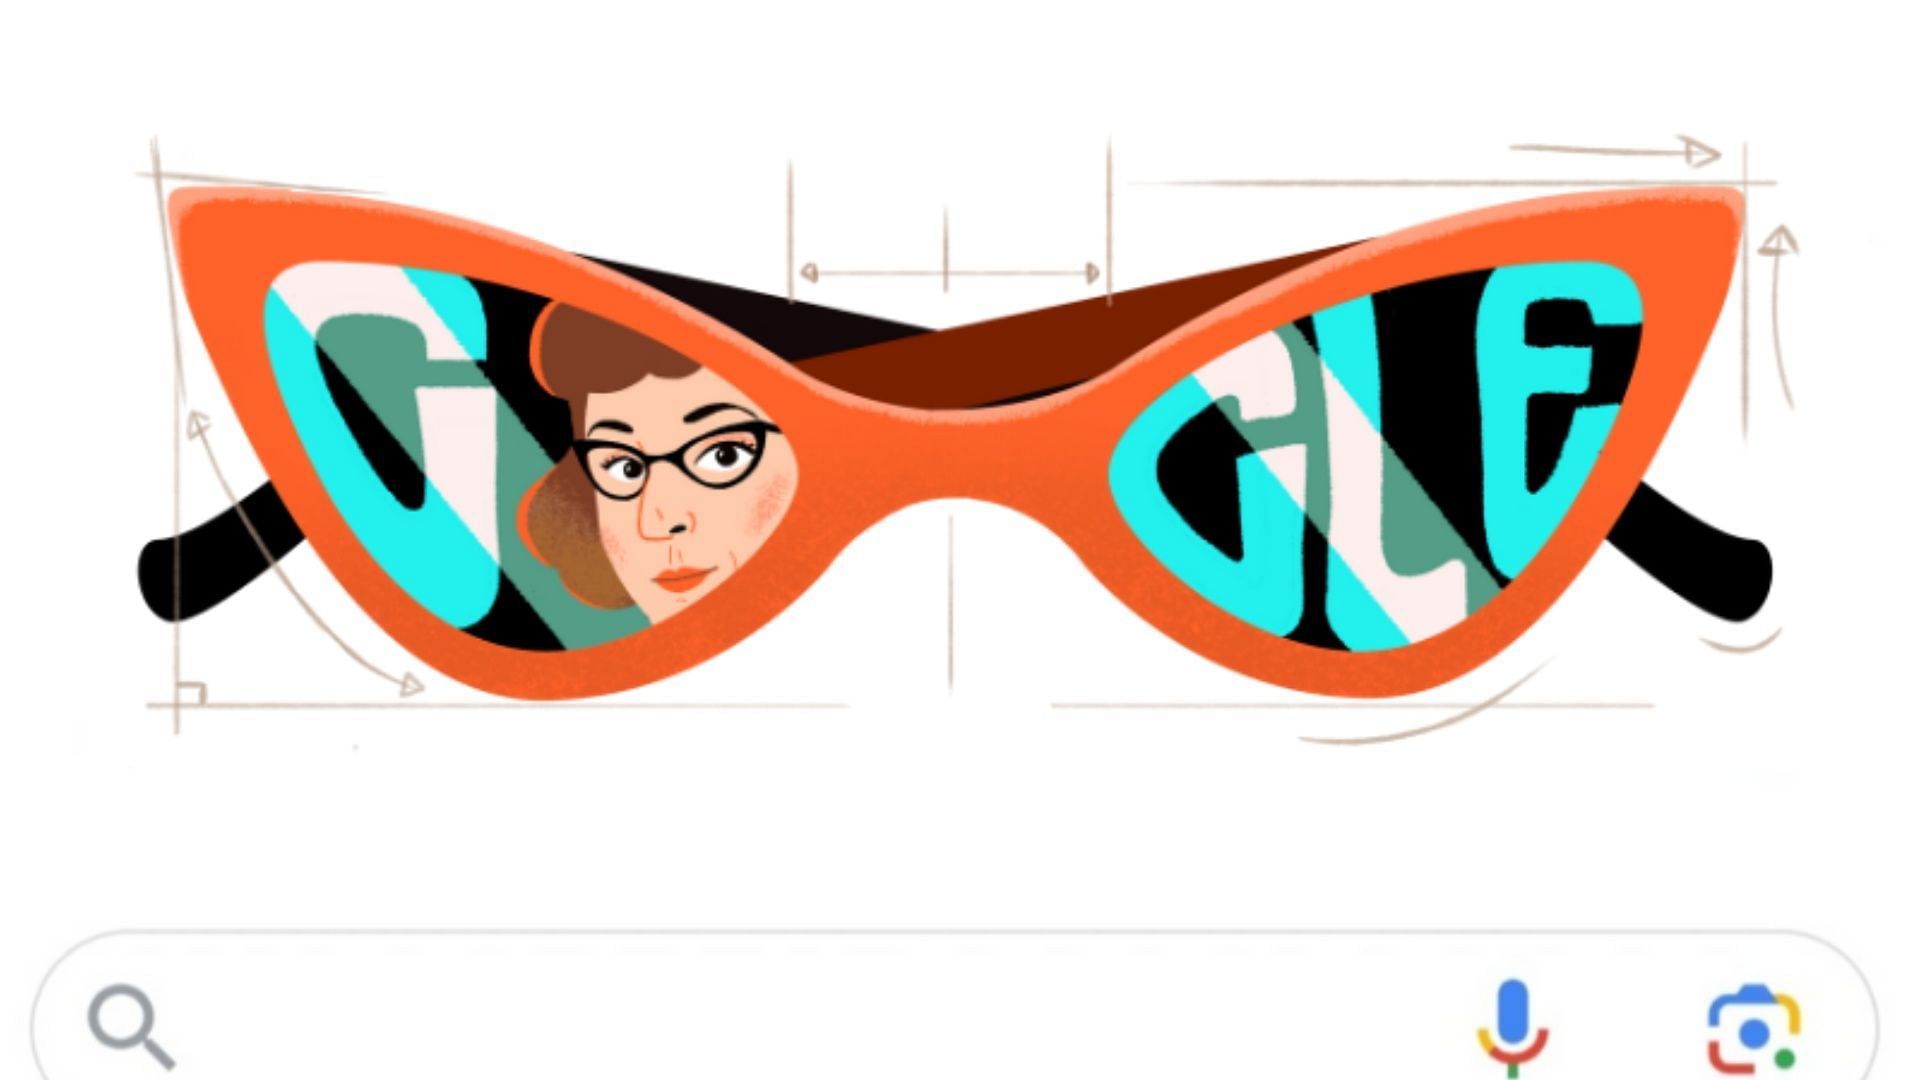 Google Doodle pays tribute to cat-eye frames